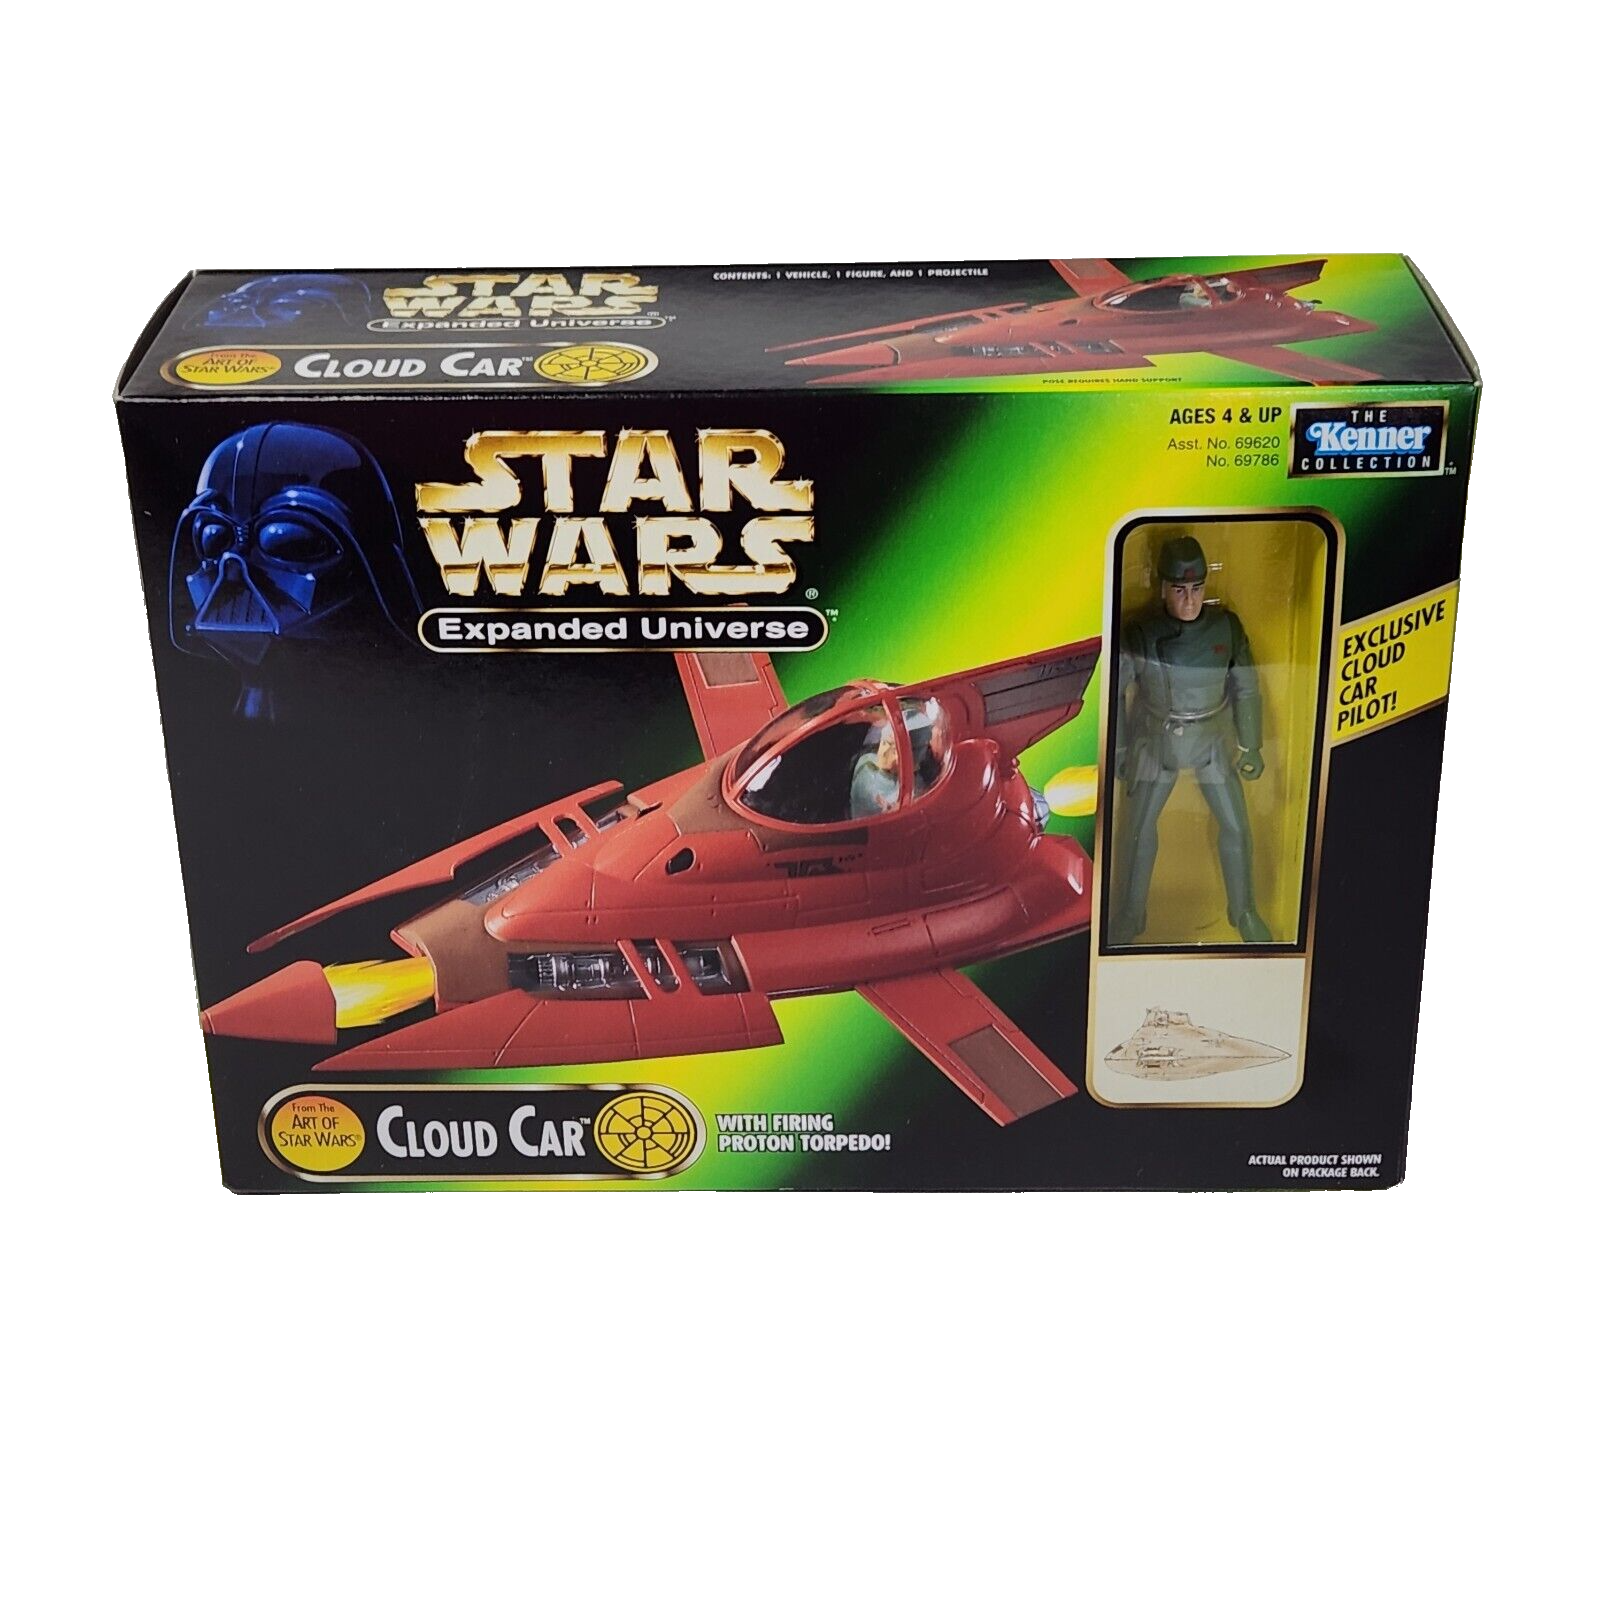 Primary image for VINTAGE 1997 KENNER STAR WARS EXPANDED UNIVERSE CLOUD CAR W PILOT NEW IN BOX